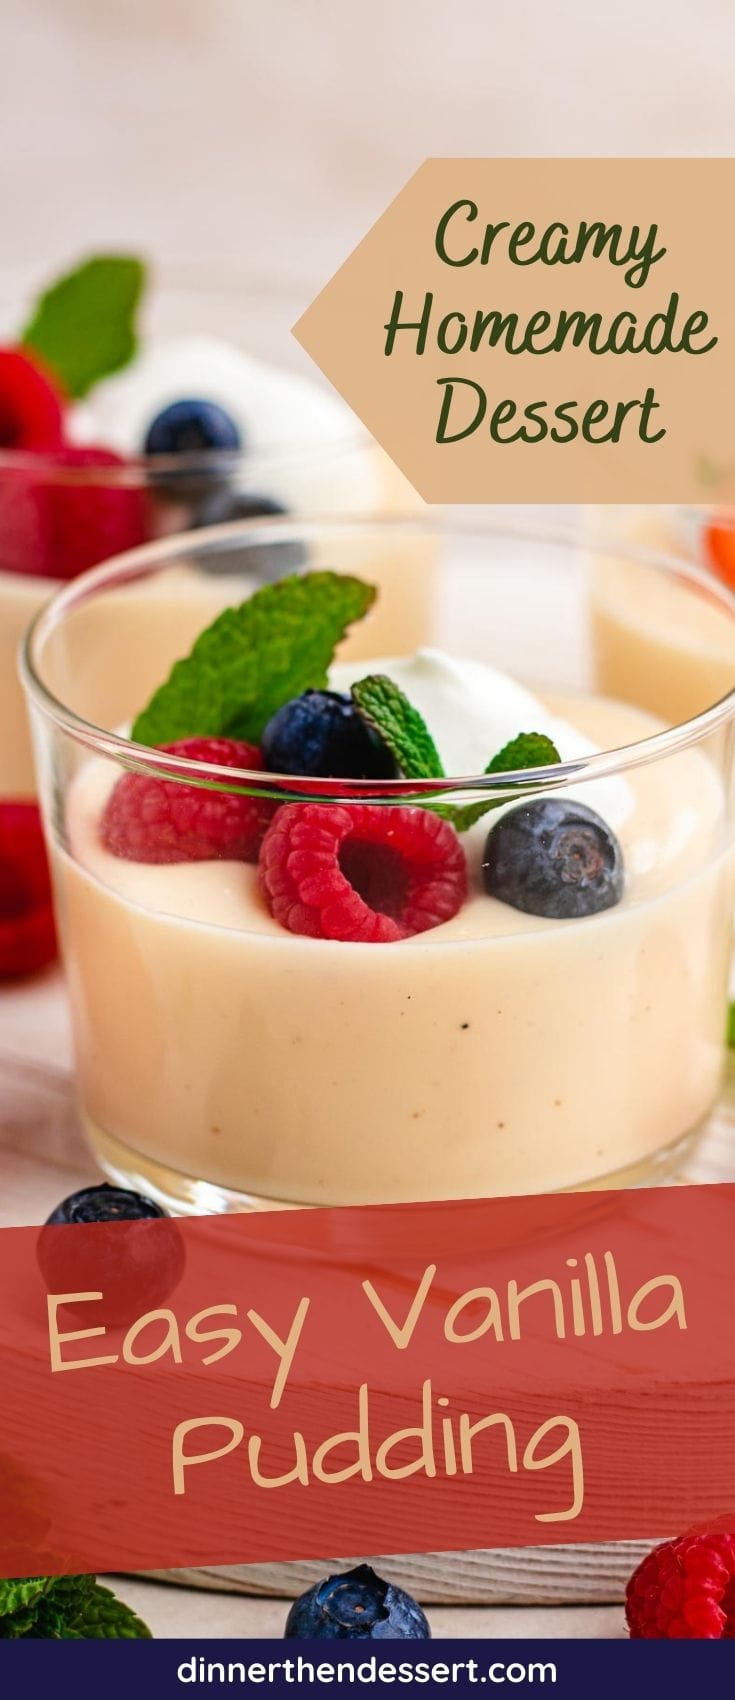 Vanilla Pudding finished in small glass cup with berries and mint garnish, recipe name across bottom